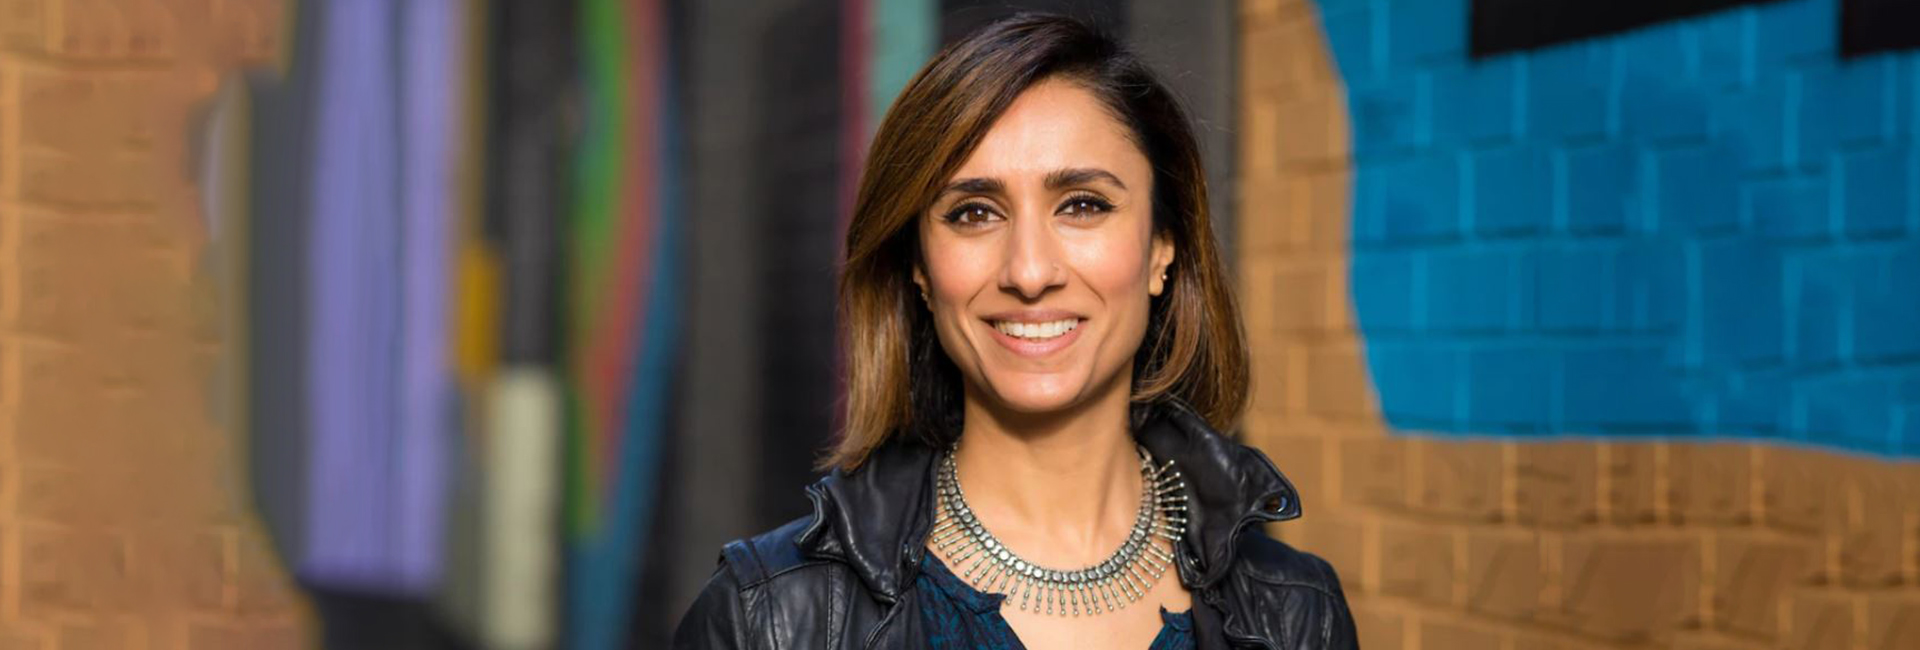 Anita Rani: The new chancellor of University of Bradford deeply values her Indian lineage